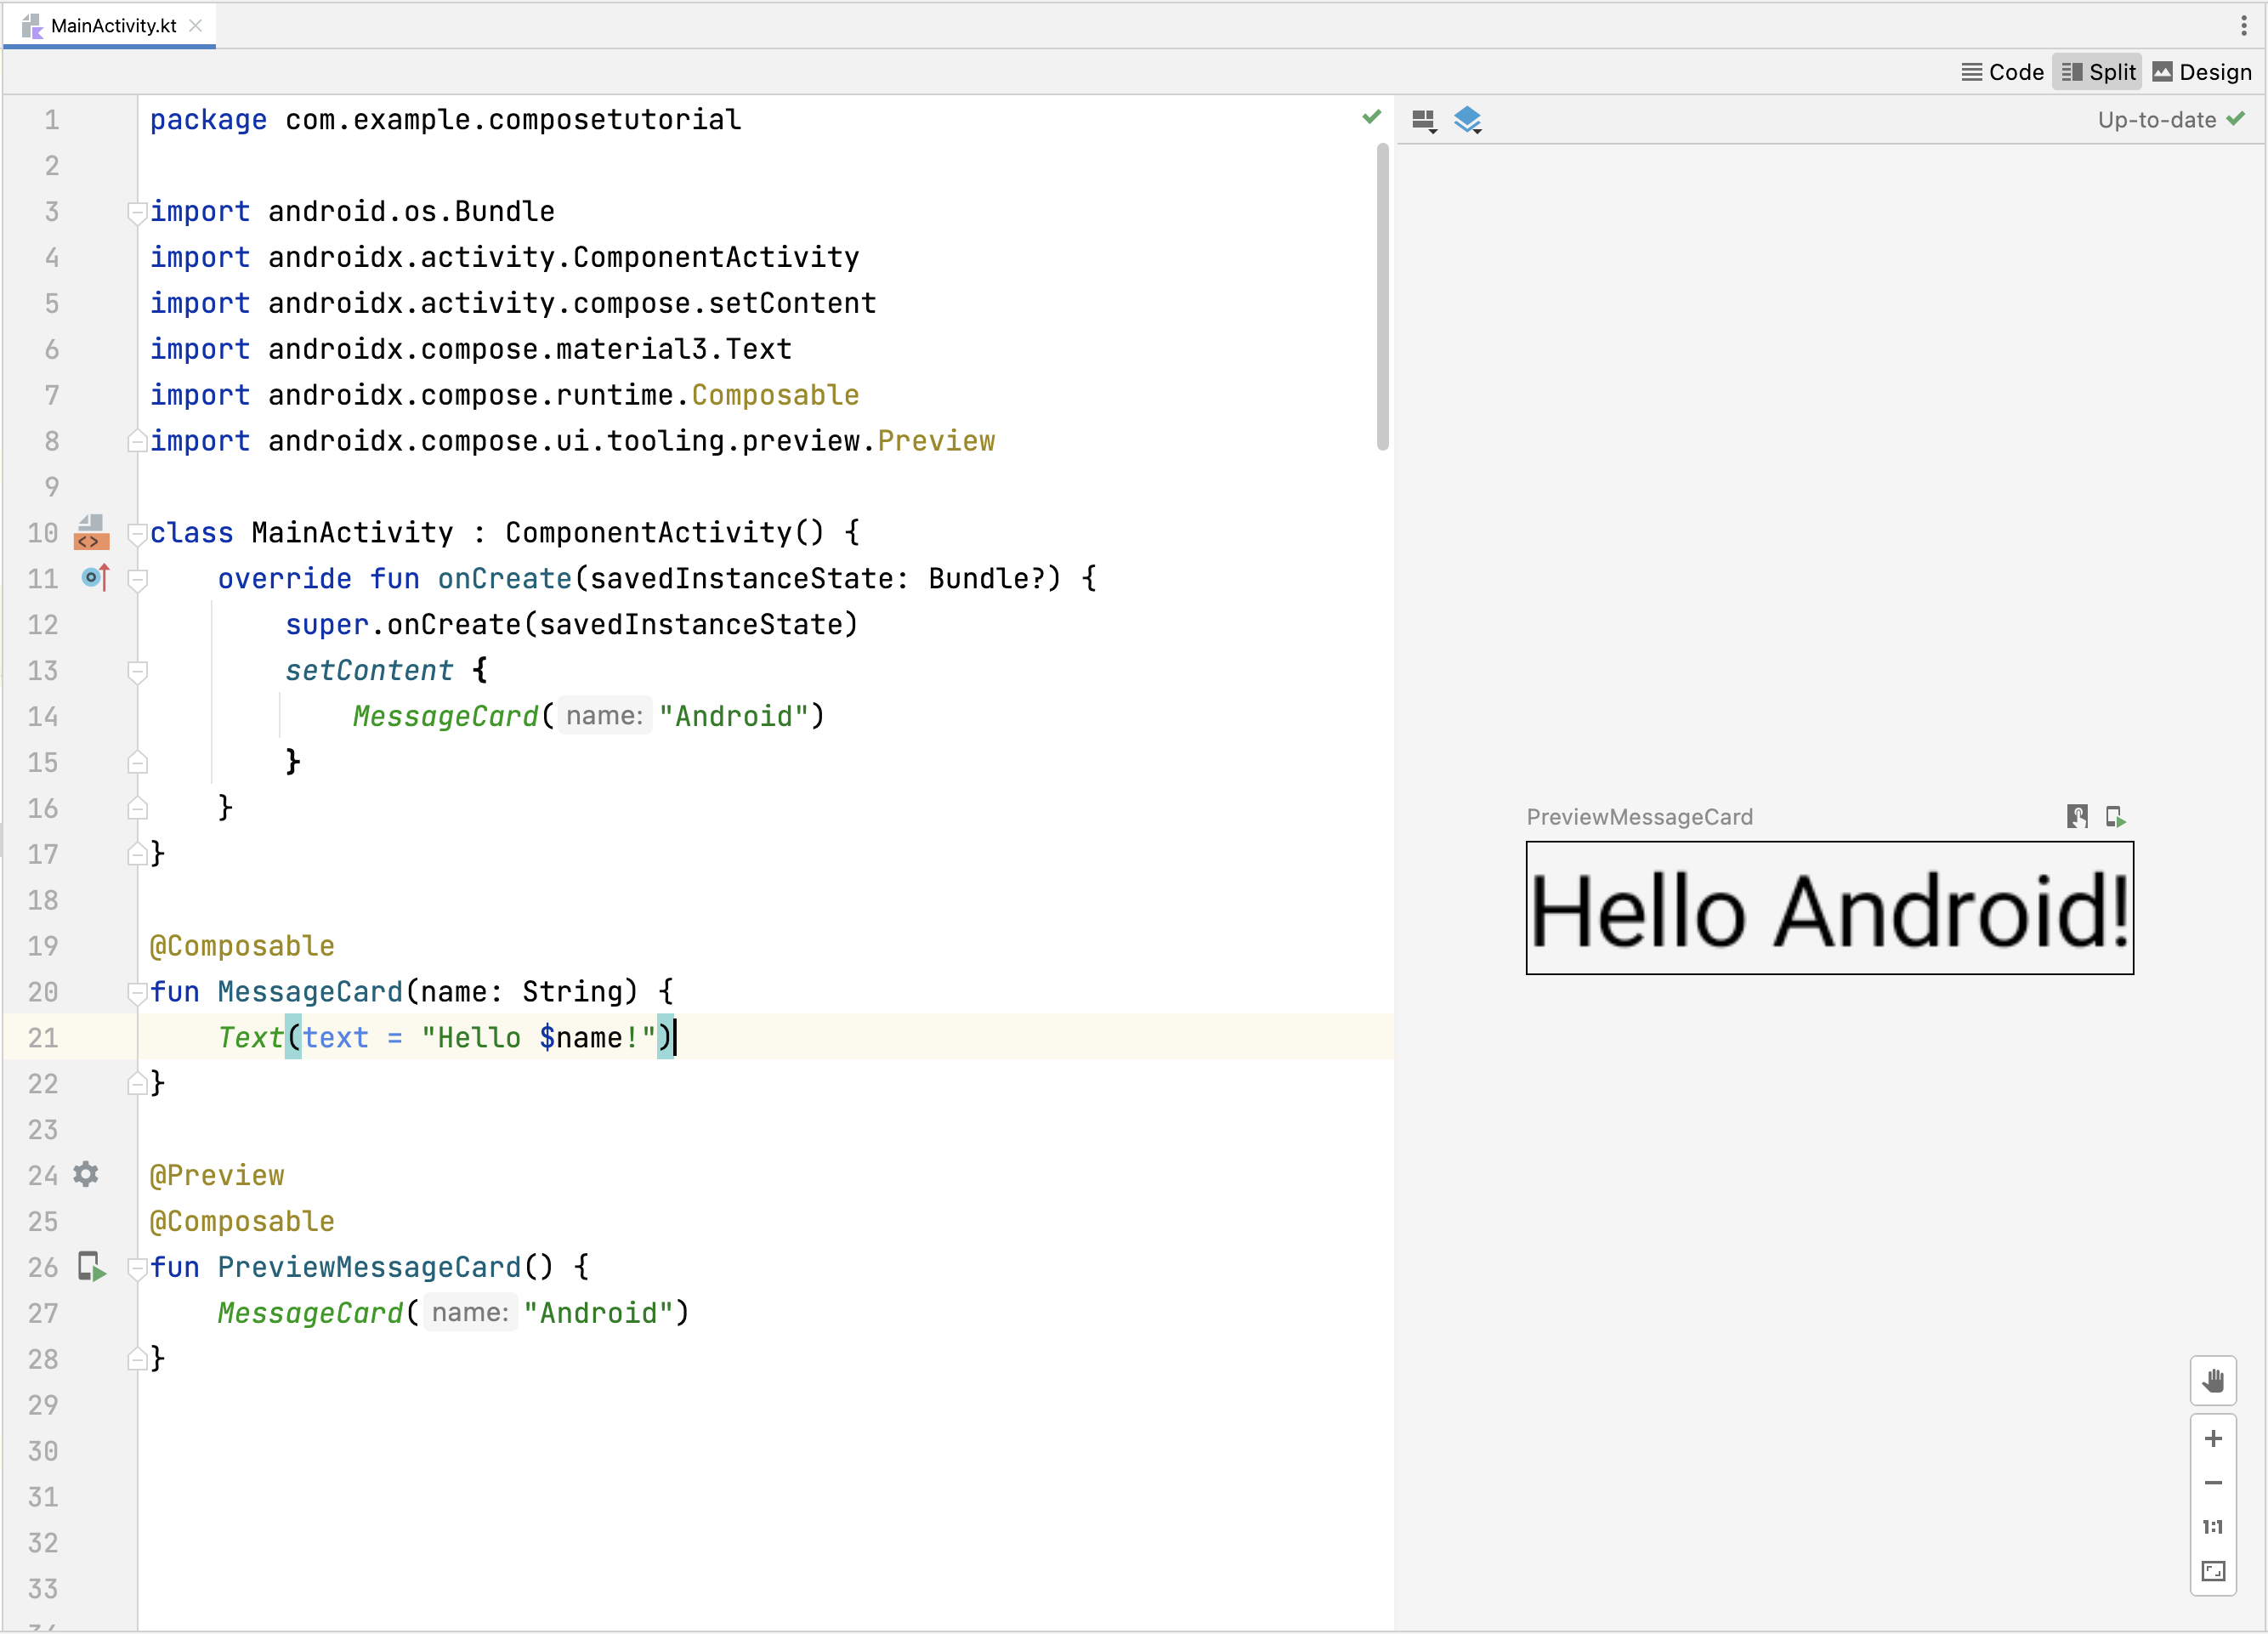 Preview of a composable function in Android Studio